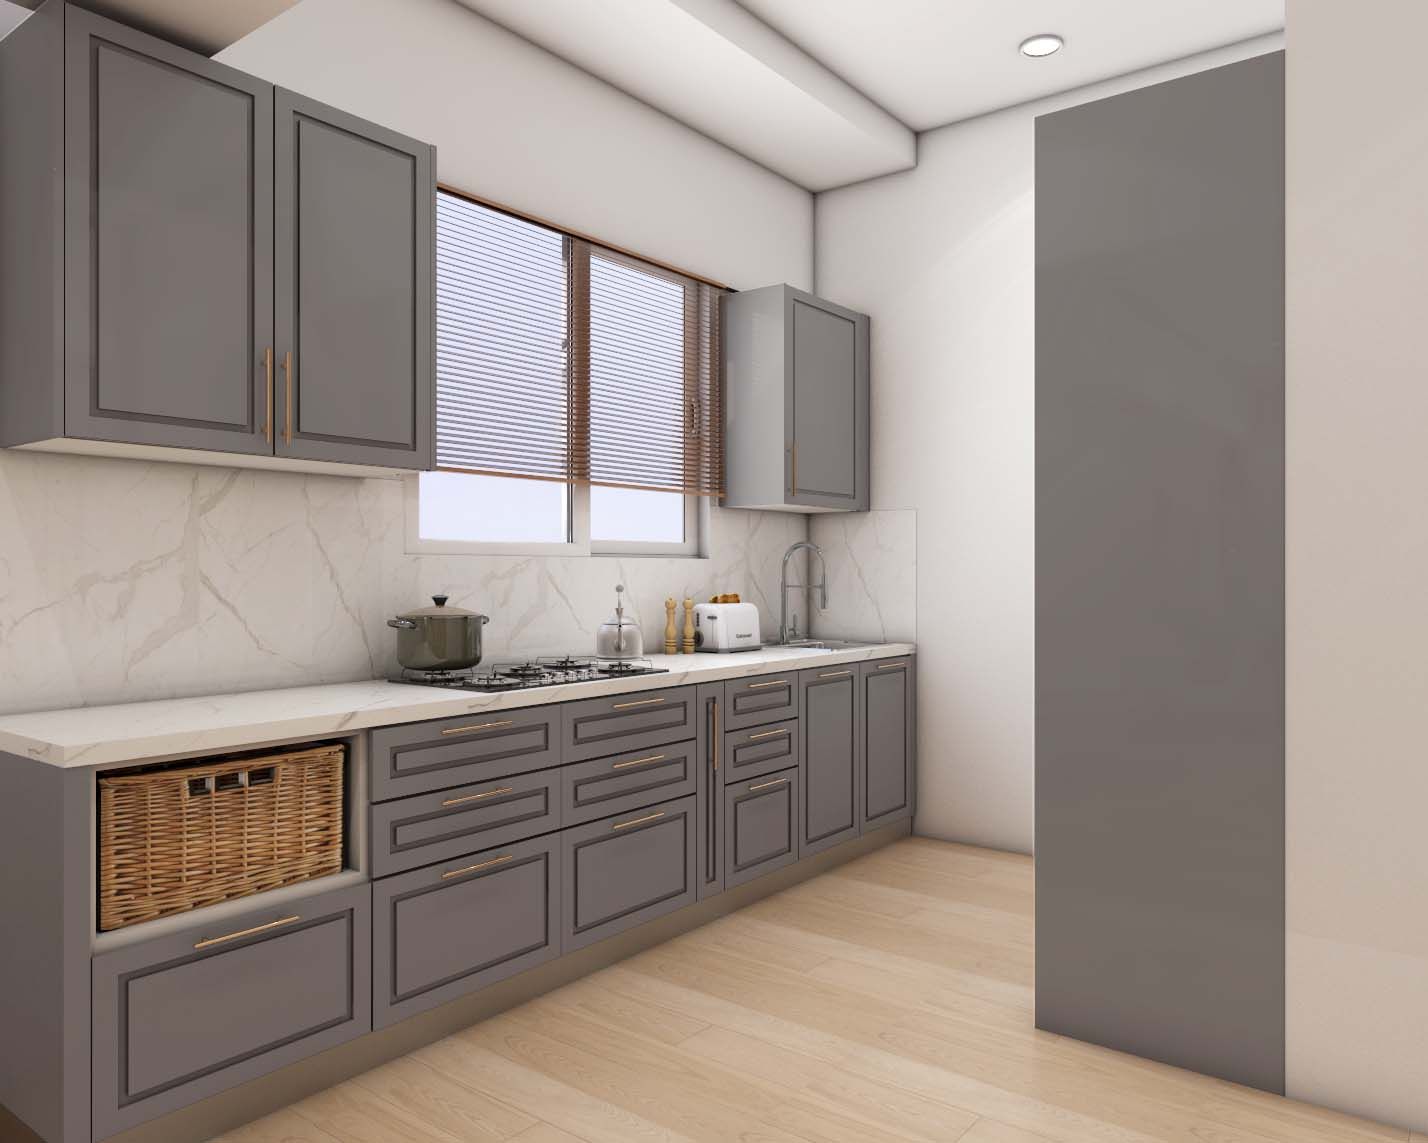 Classic Modular Kitchen Design With Grey Shutters And Brass Handles